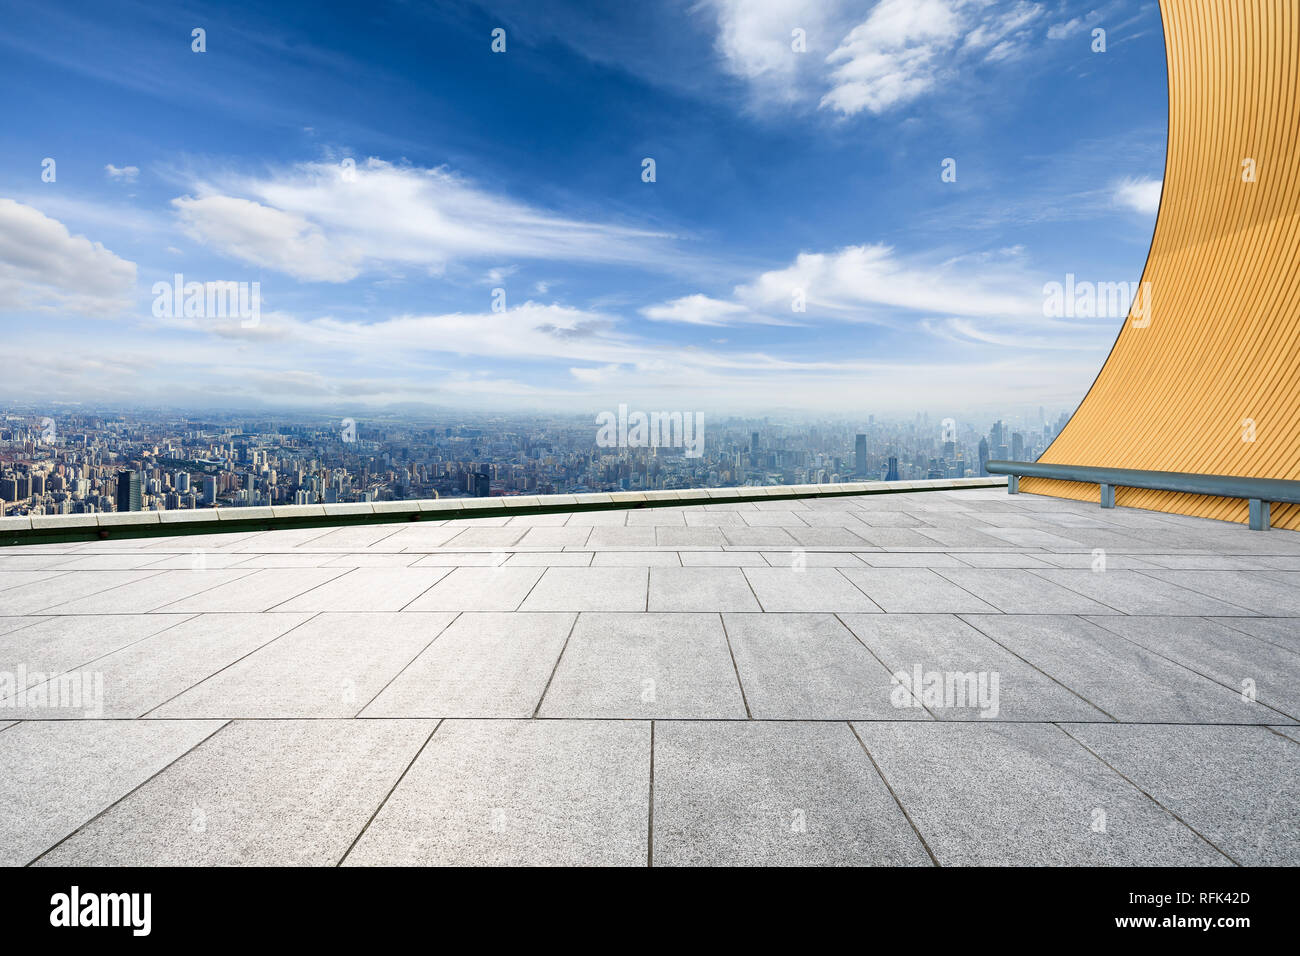 Panoramic city skyline and buildings with empty square floor in Shanghai,high angle view Stock Photo